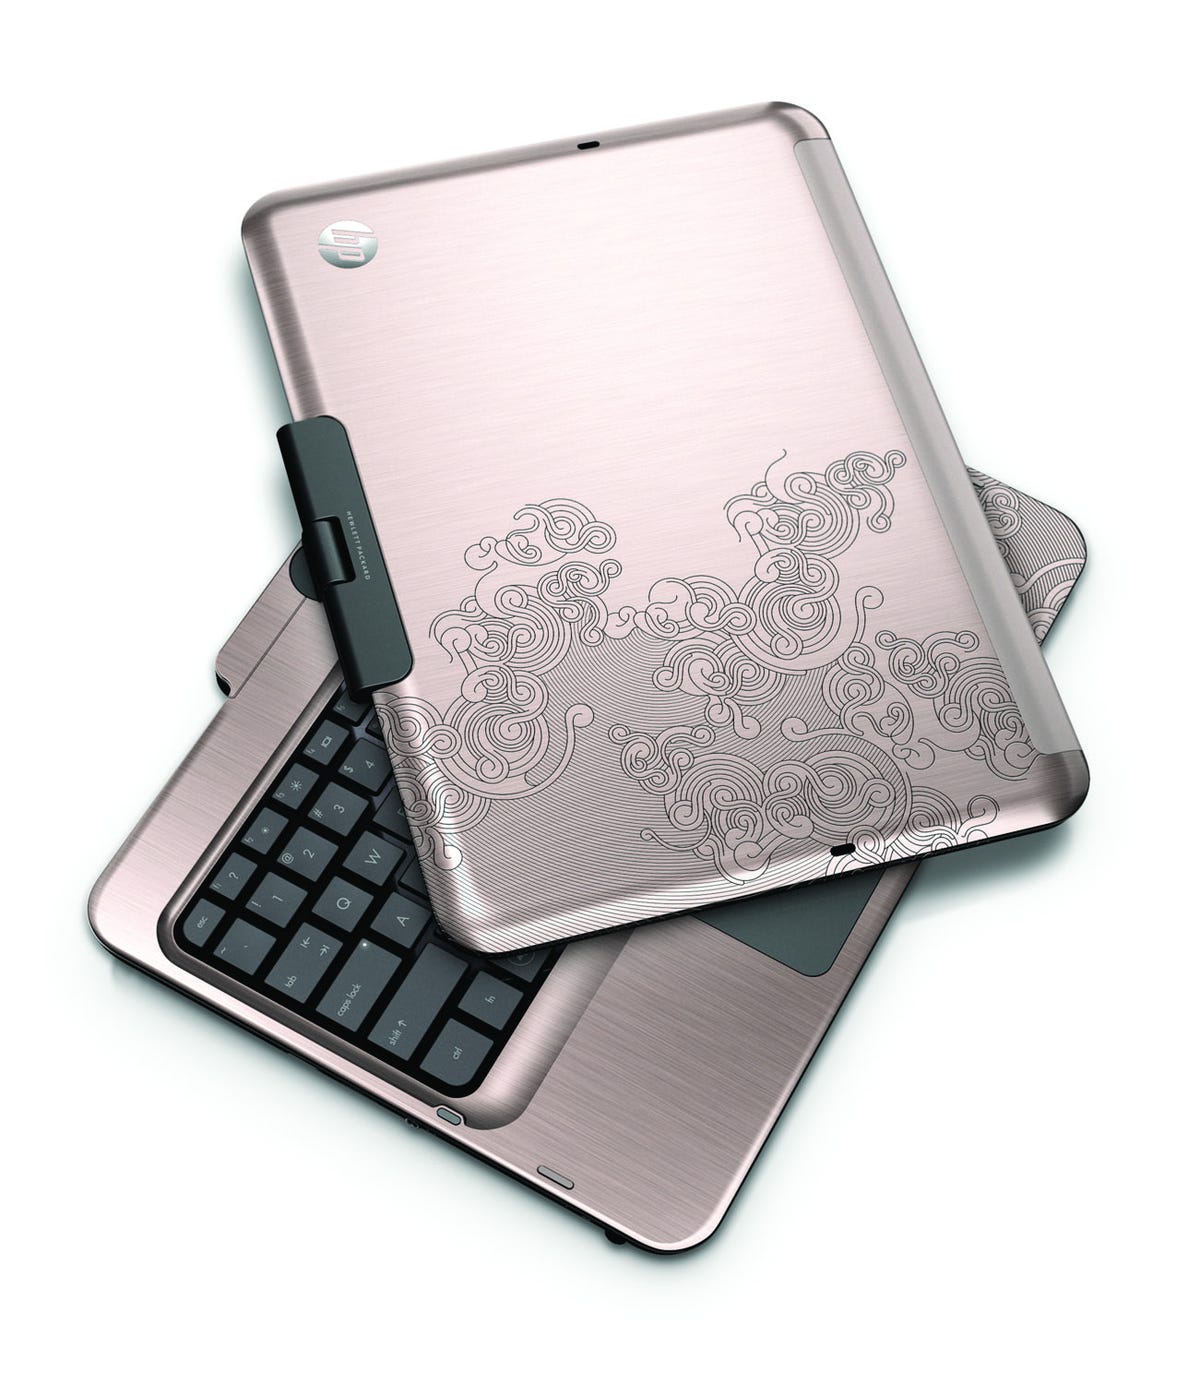 HP_TouchSmart_tm2,_tablet_PC,_twist_top_closed_on_white.jpg